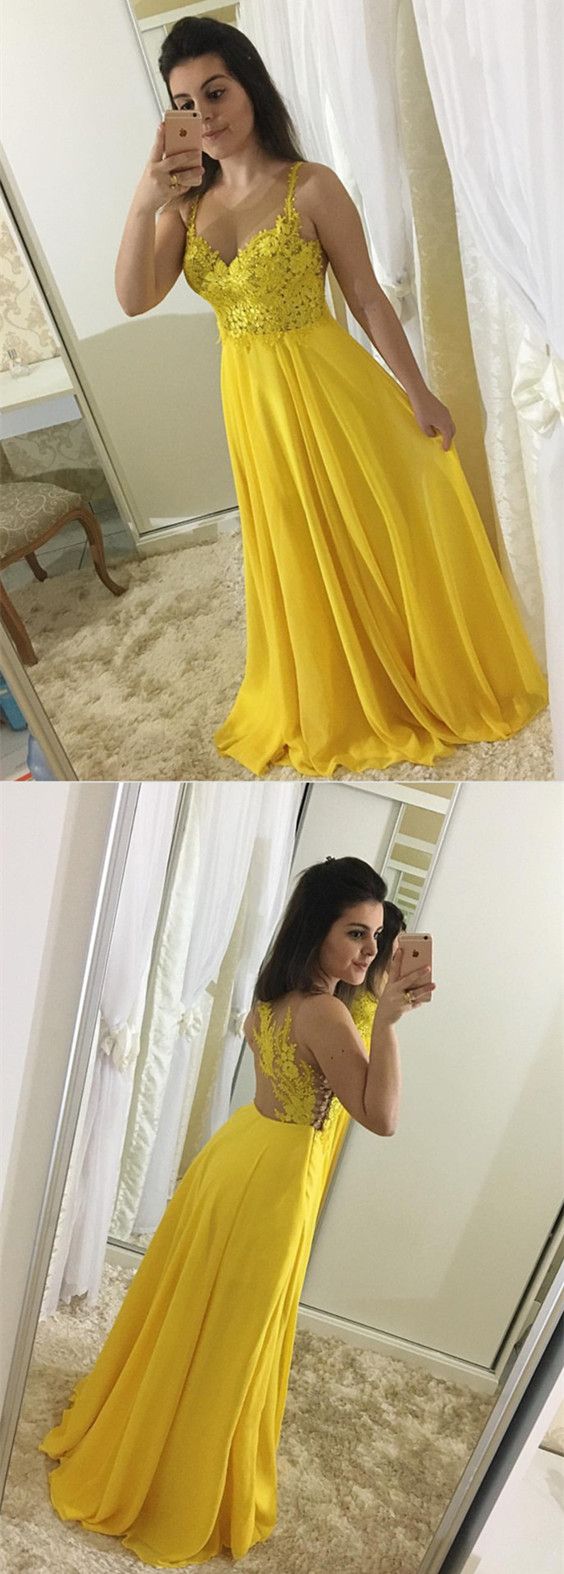 Elegant Lace Appliques Nude Back Chiffon Evening Dress Floor Length Prom Gowns ,2018 Spaghetti Straps Yellow Formal Evening Dress. A Line Women